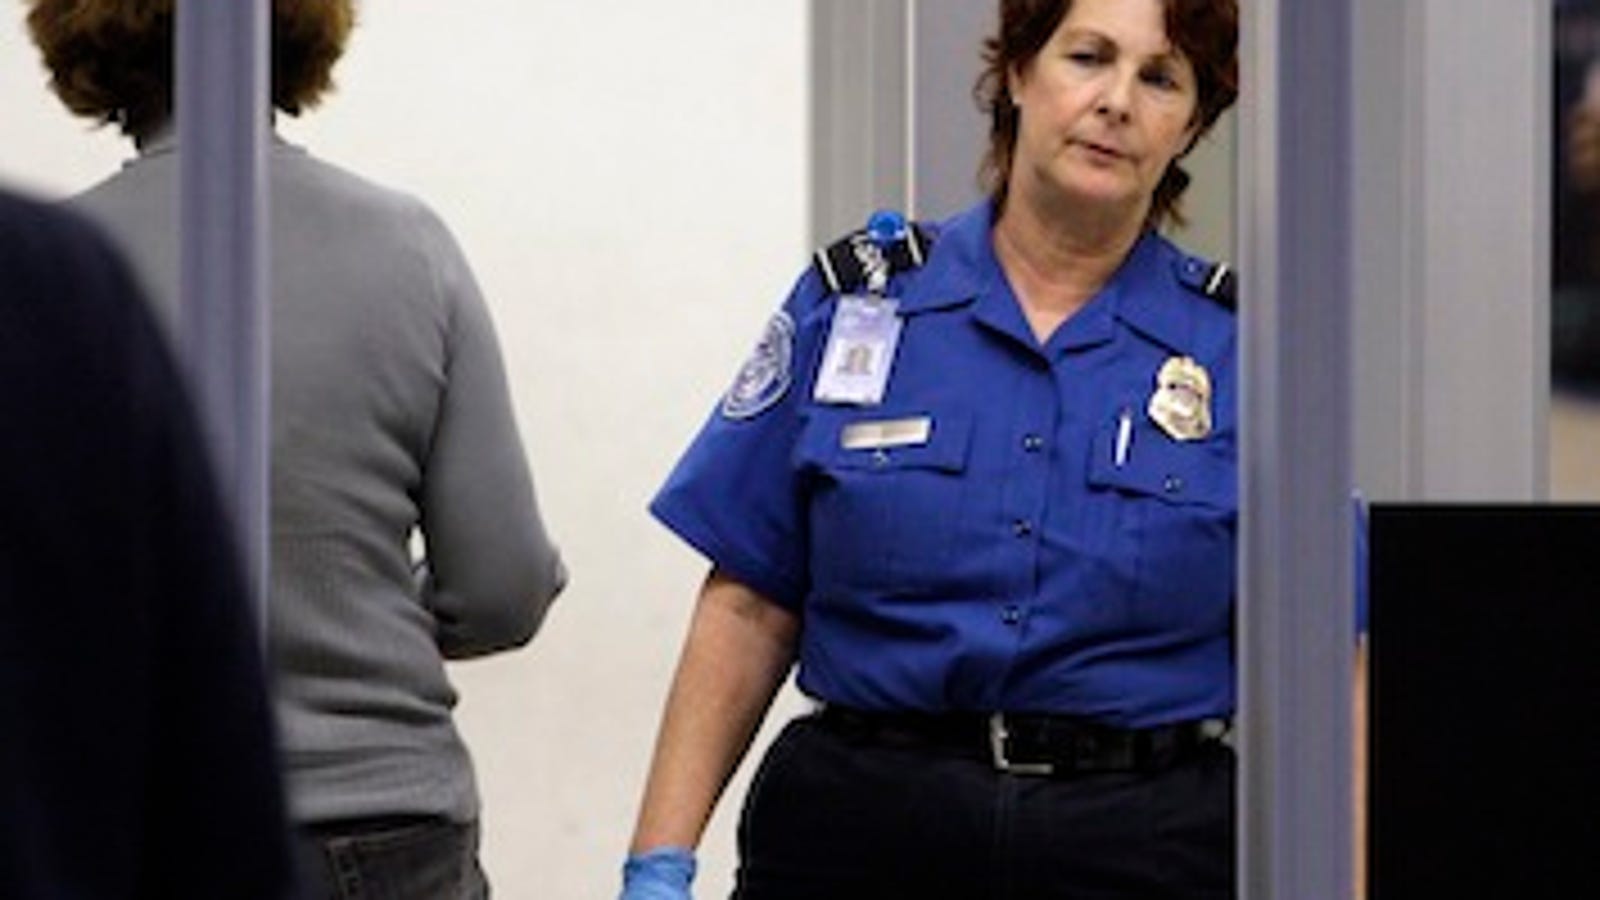 Woman Awarded “nominal” Settlement After Tsa Exposes Her Breasts